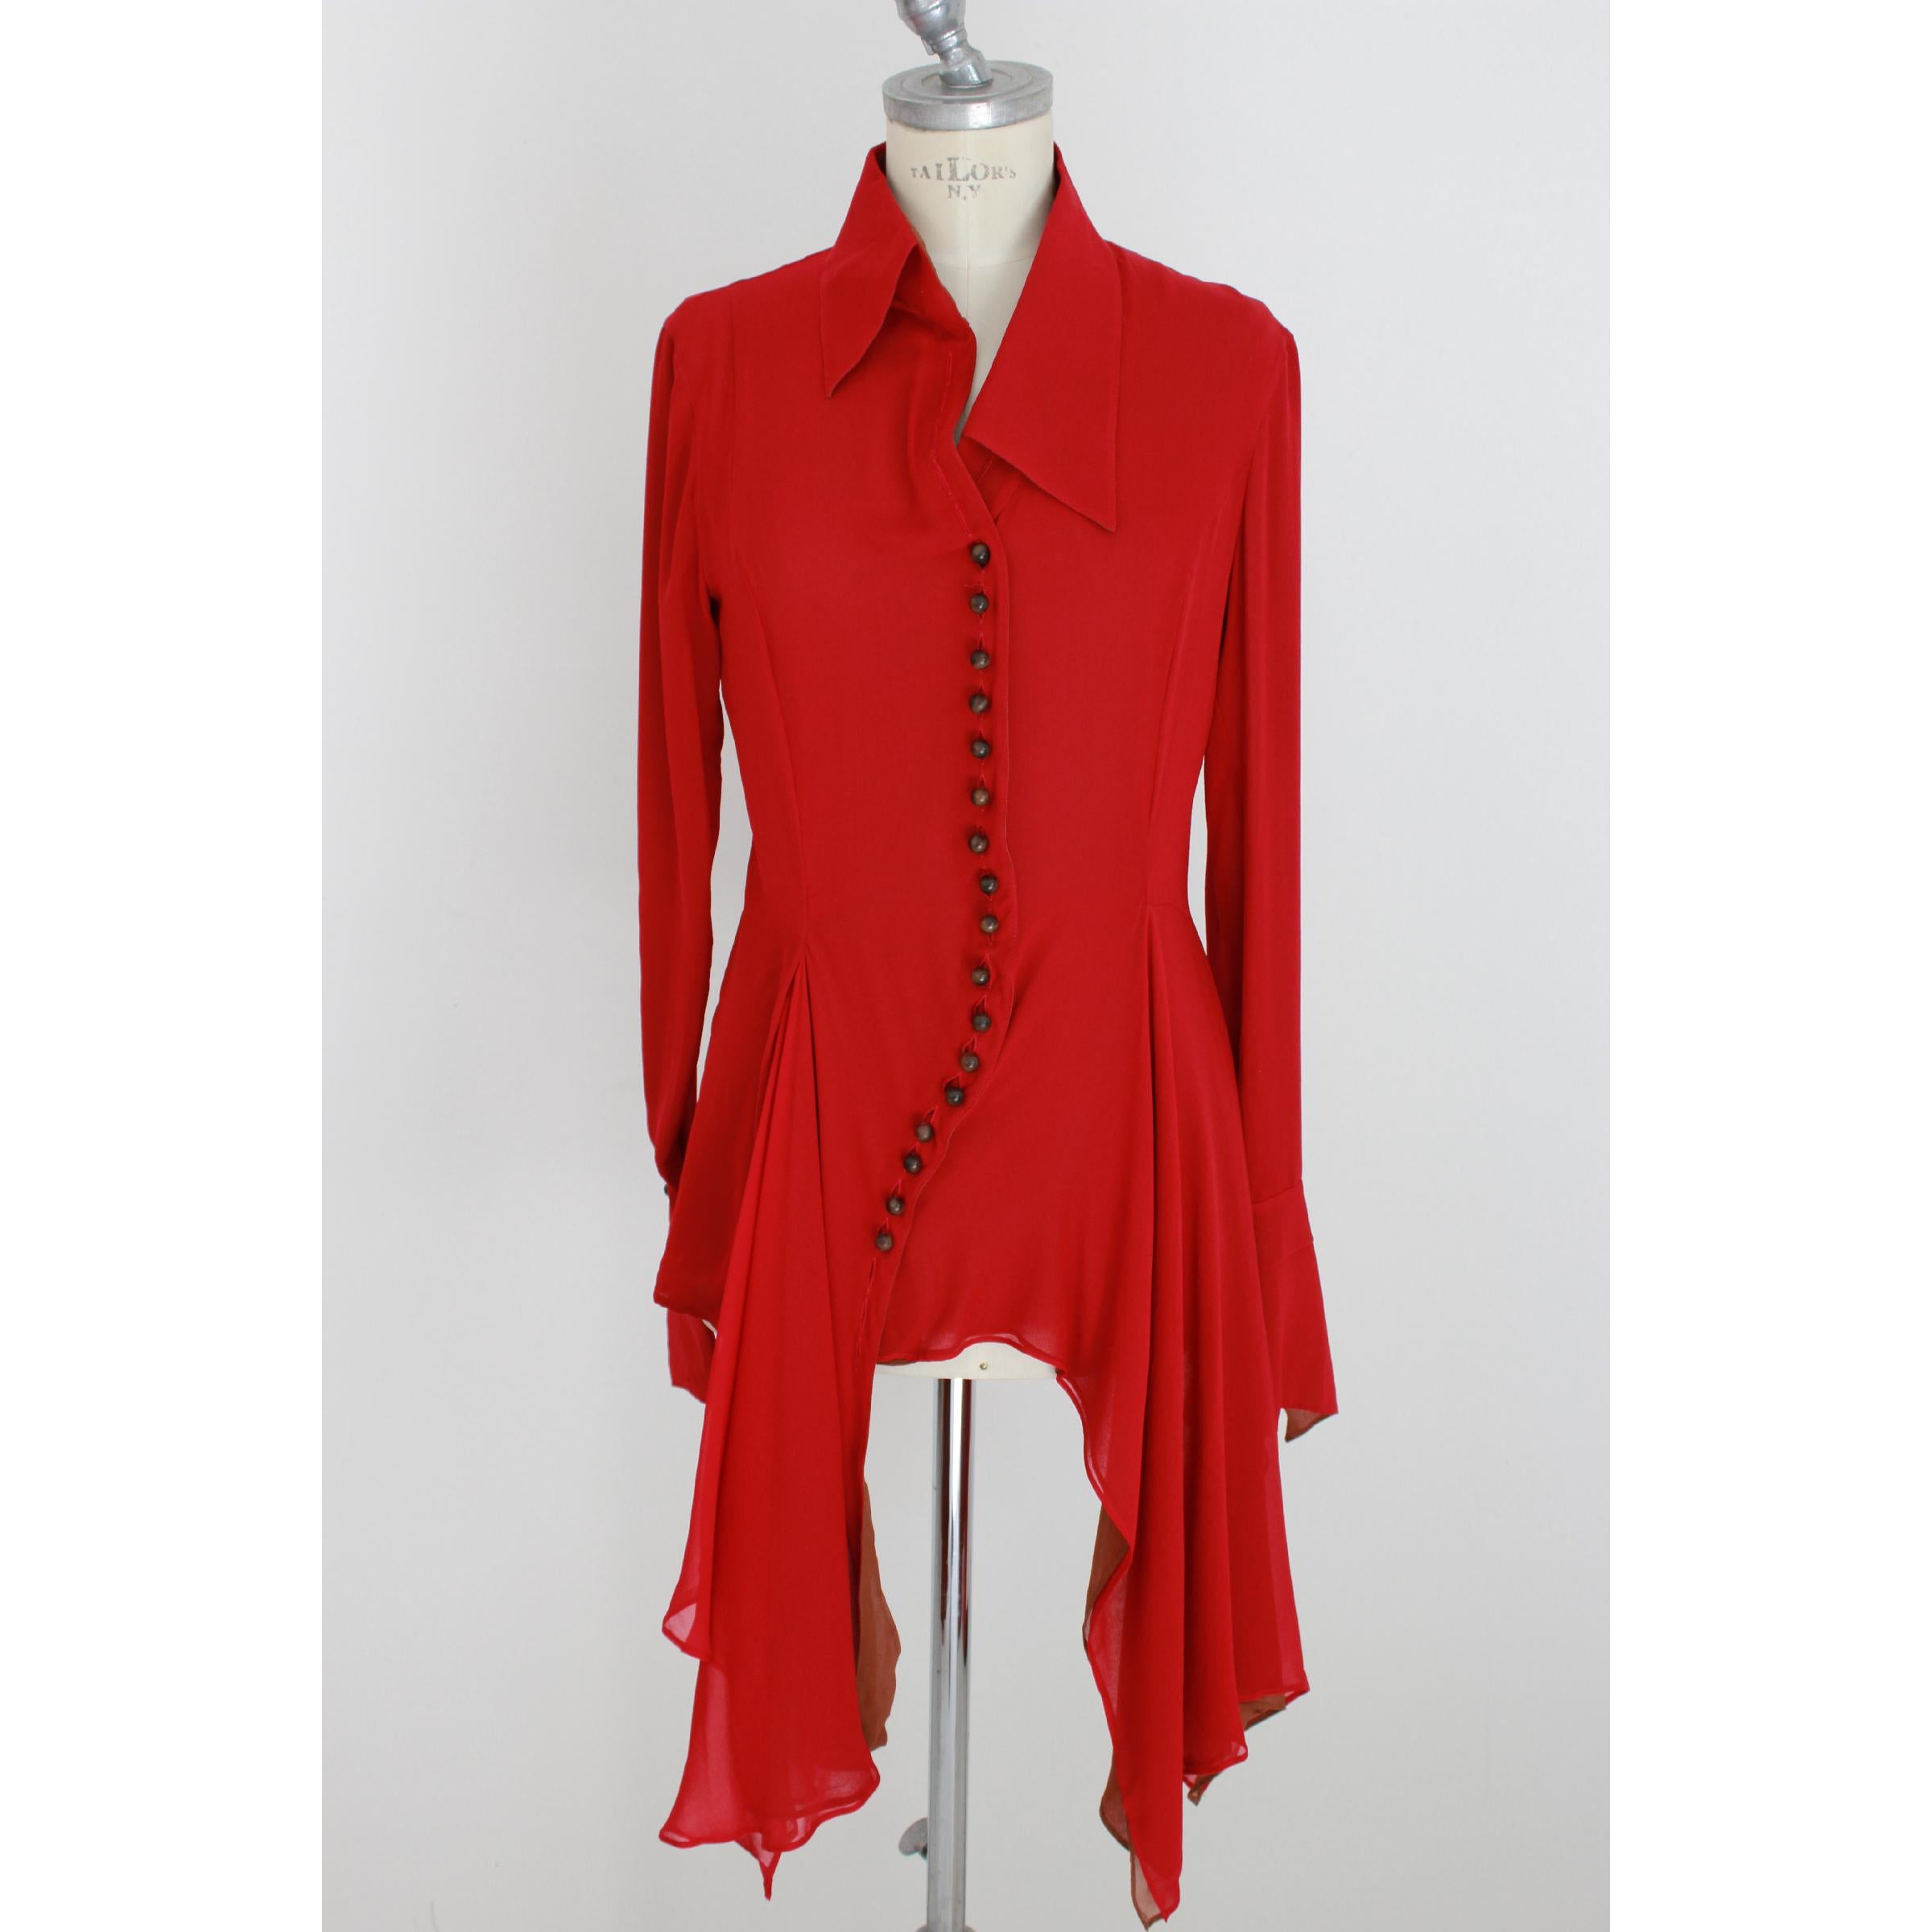 Gianfranco Ferre vintage women's shirt, red, 100% silk. Asymmetric model with long tails on the front. Brown color interior. Pointed collar, sleeve with long cuff. Shirt produced only for Japan. Excellent vintage conditions. Made in Italy.
Size: 44